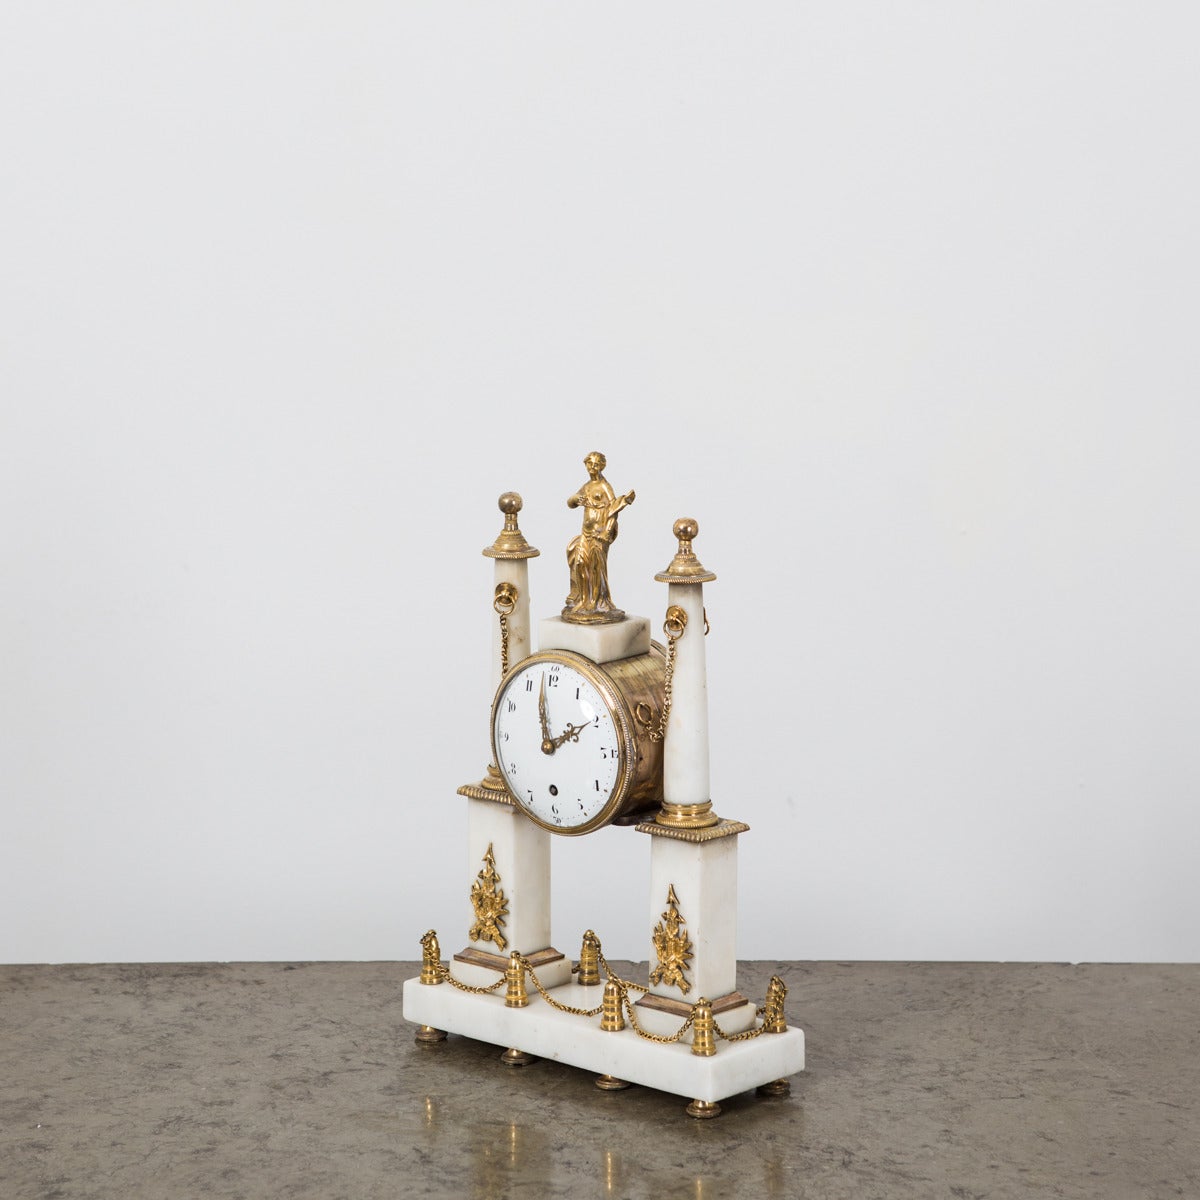 A delicate mantle clock made during the 18th Century in France. White marble with gilt bronze decorations. Working machinery and original enamel face with black arabic numbers. 